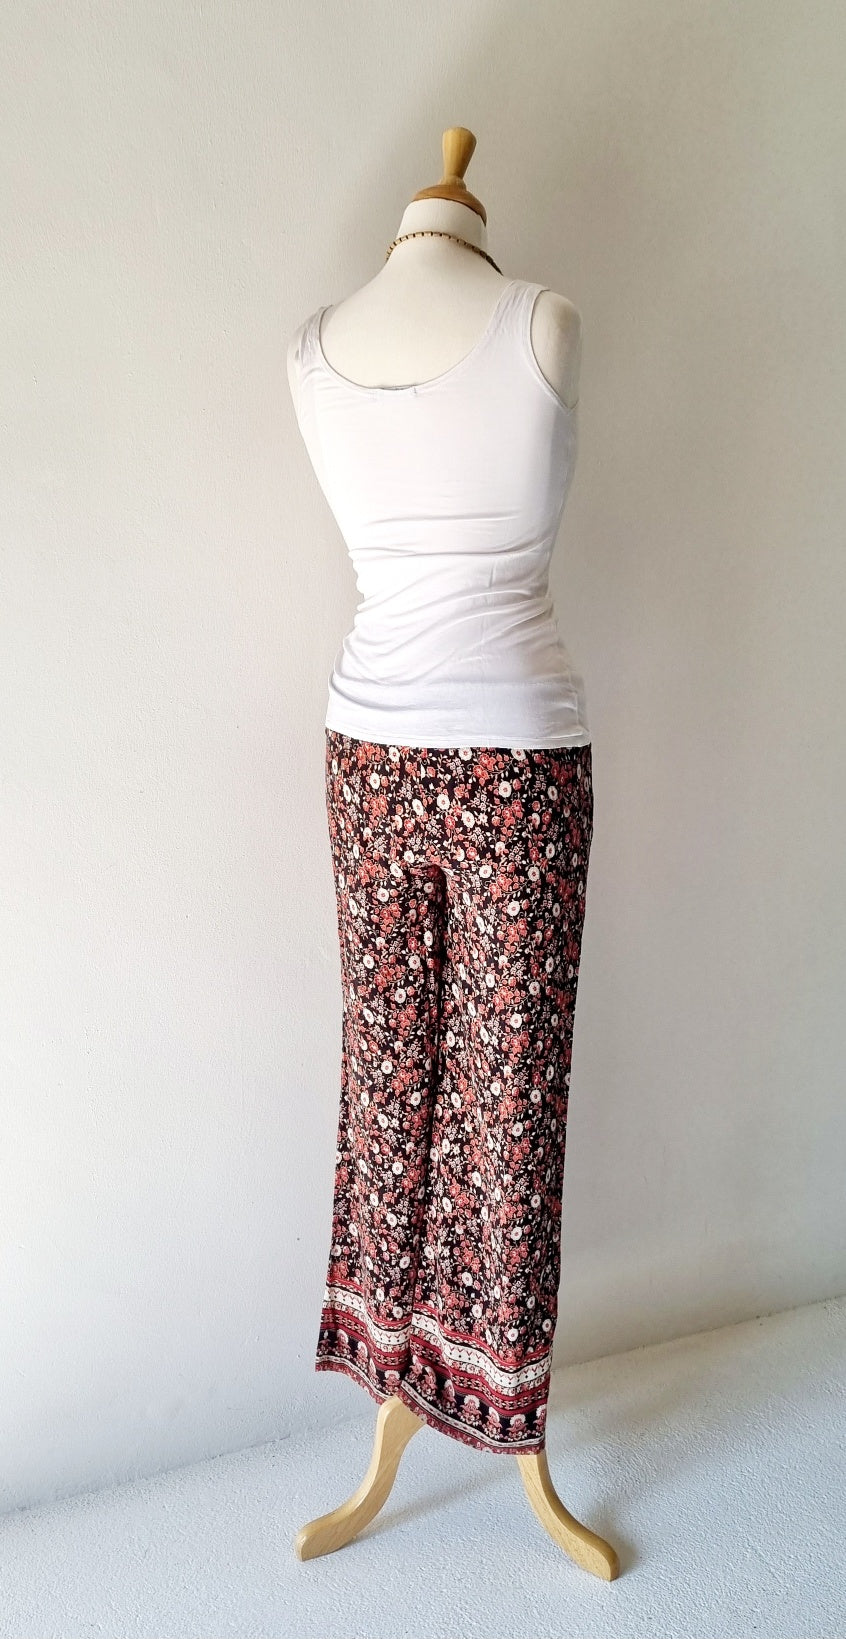 Trs - Brown & Beige wide leg relaxed slacks with side pockets